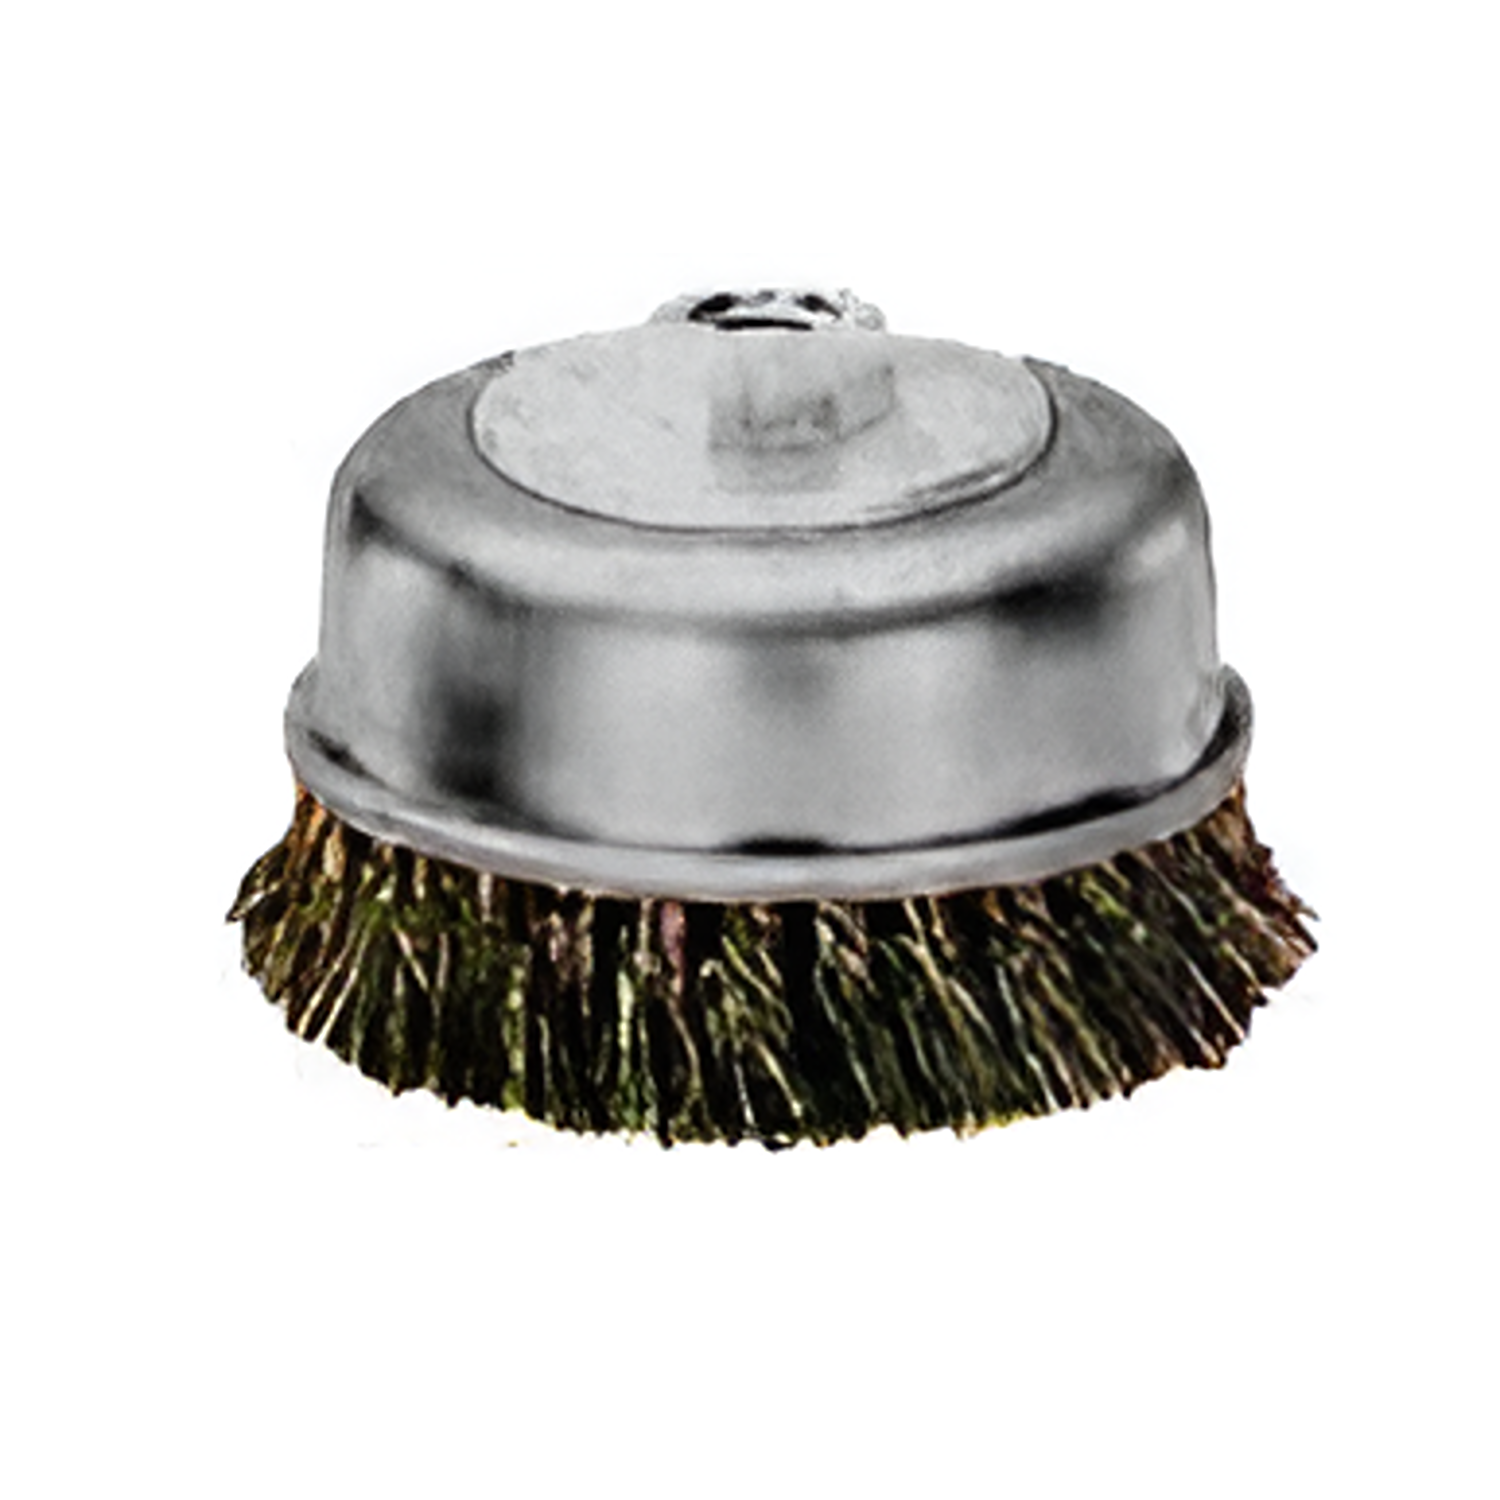 YEW AIK AE00148 NSK Stainless Steel Twist Knot Cup Brush - Premium Cup Brush from YEW AIK - Shop now at Yew Aik.